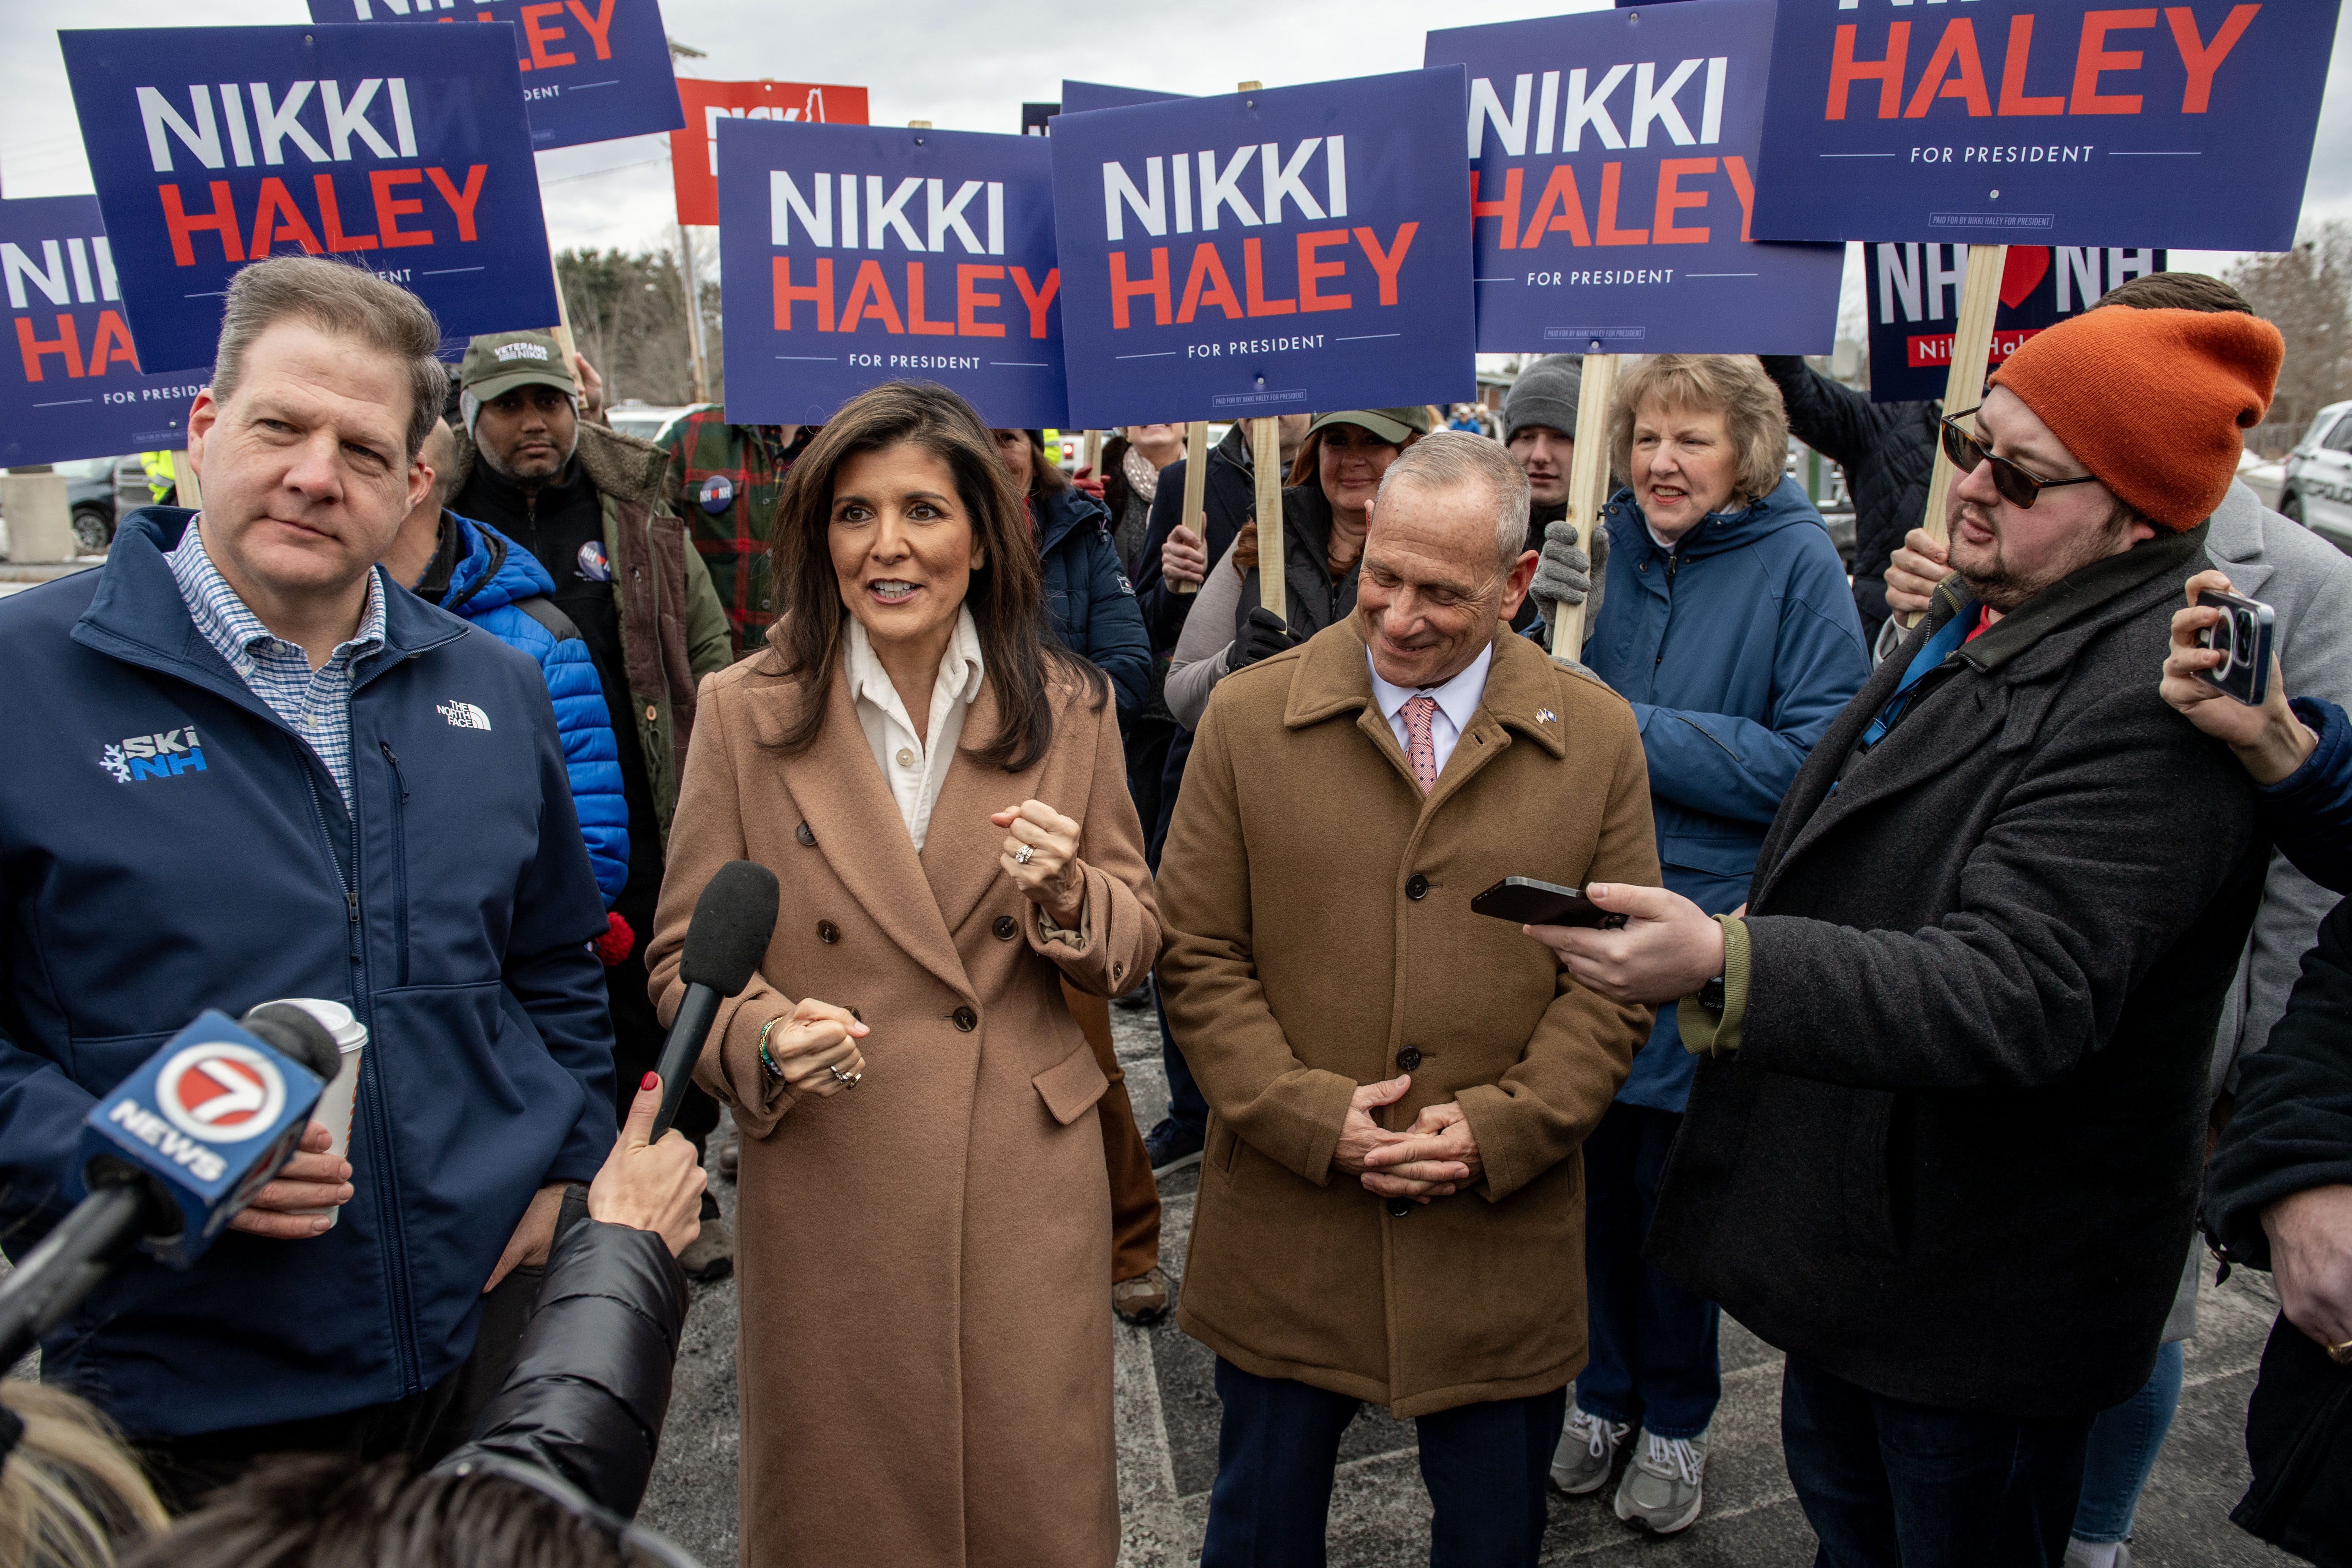 His main rival Nikki Haley had started the night positively with early votes